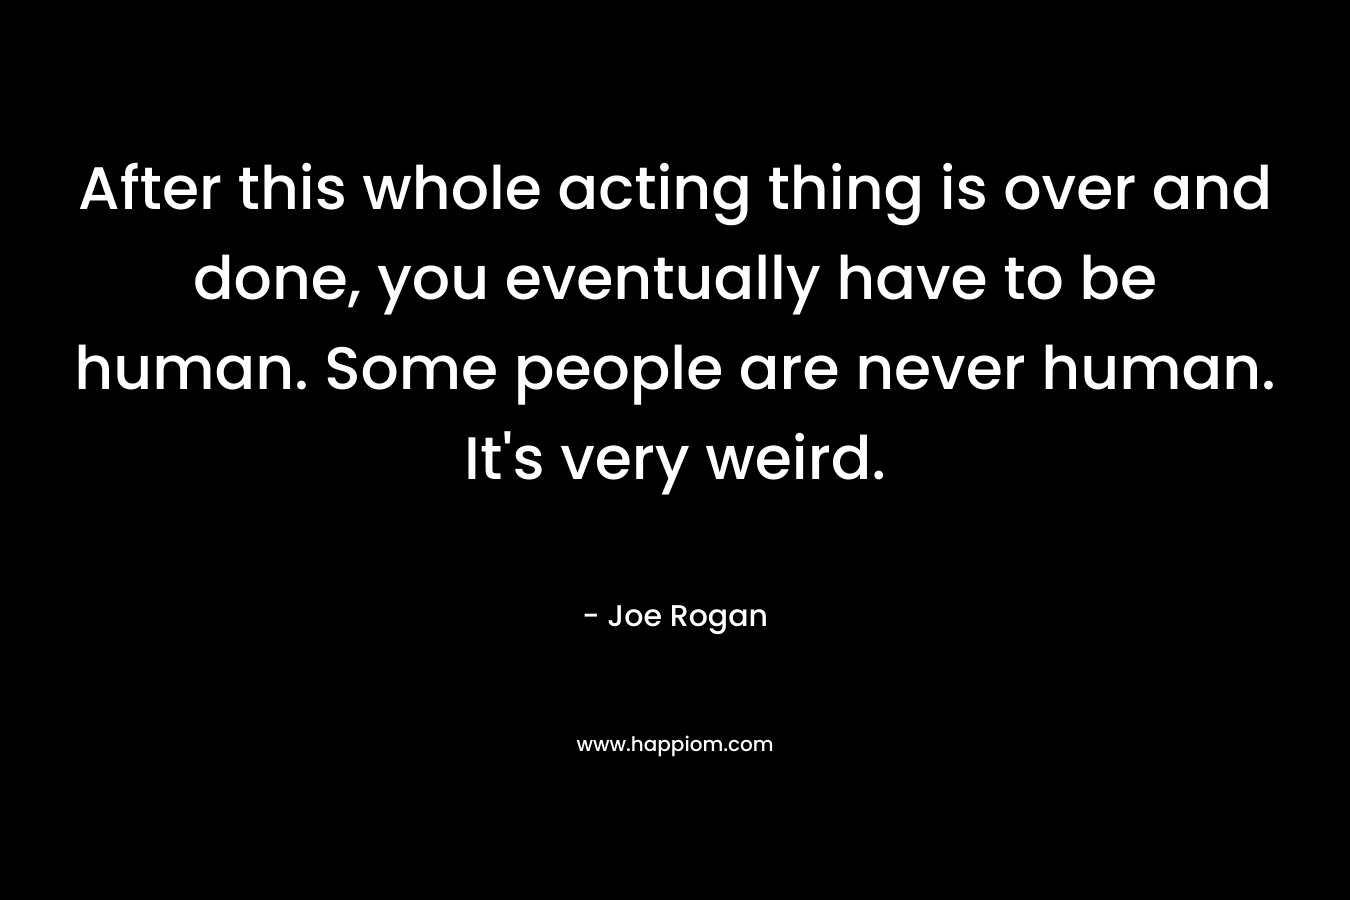 After this whole acting thing is over and done, you eventually have to be human. Some people are never human. It’s very weird. – Joe Rogan